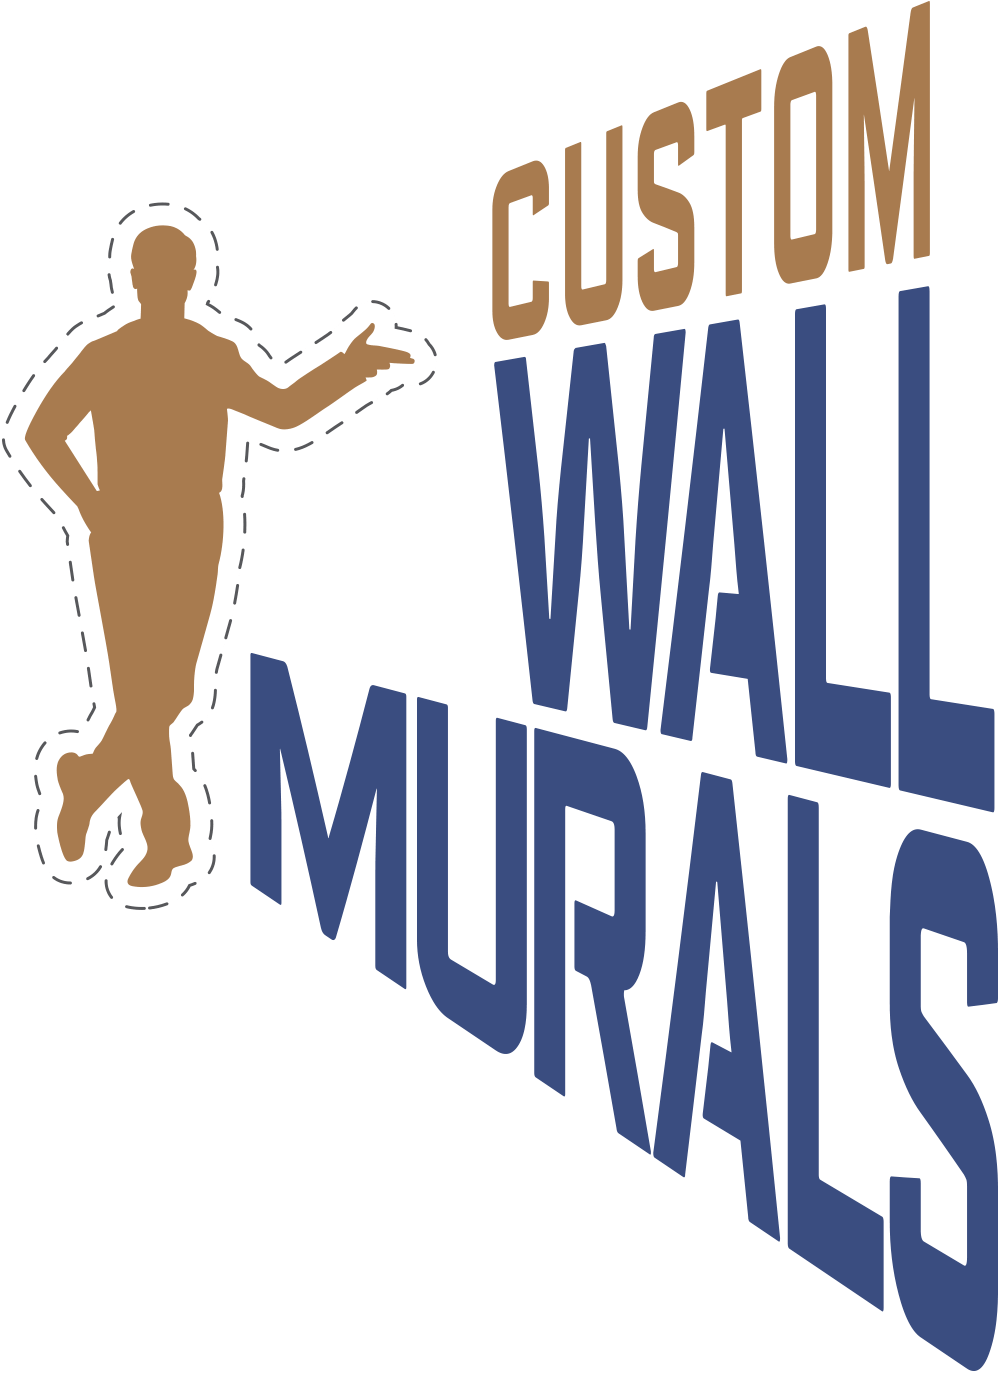 custom-wall-mural-prints-large-or-small-interior-decals